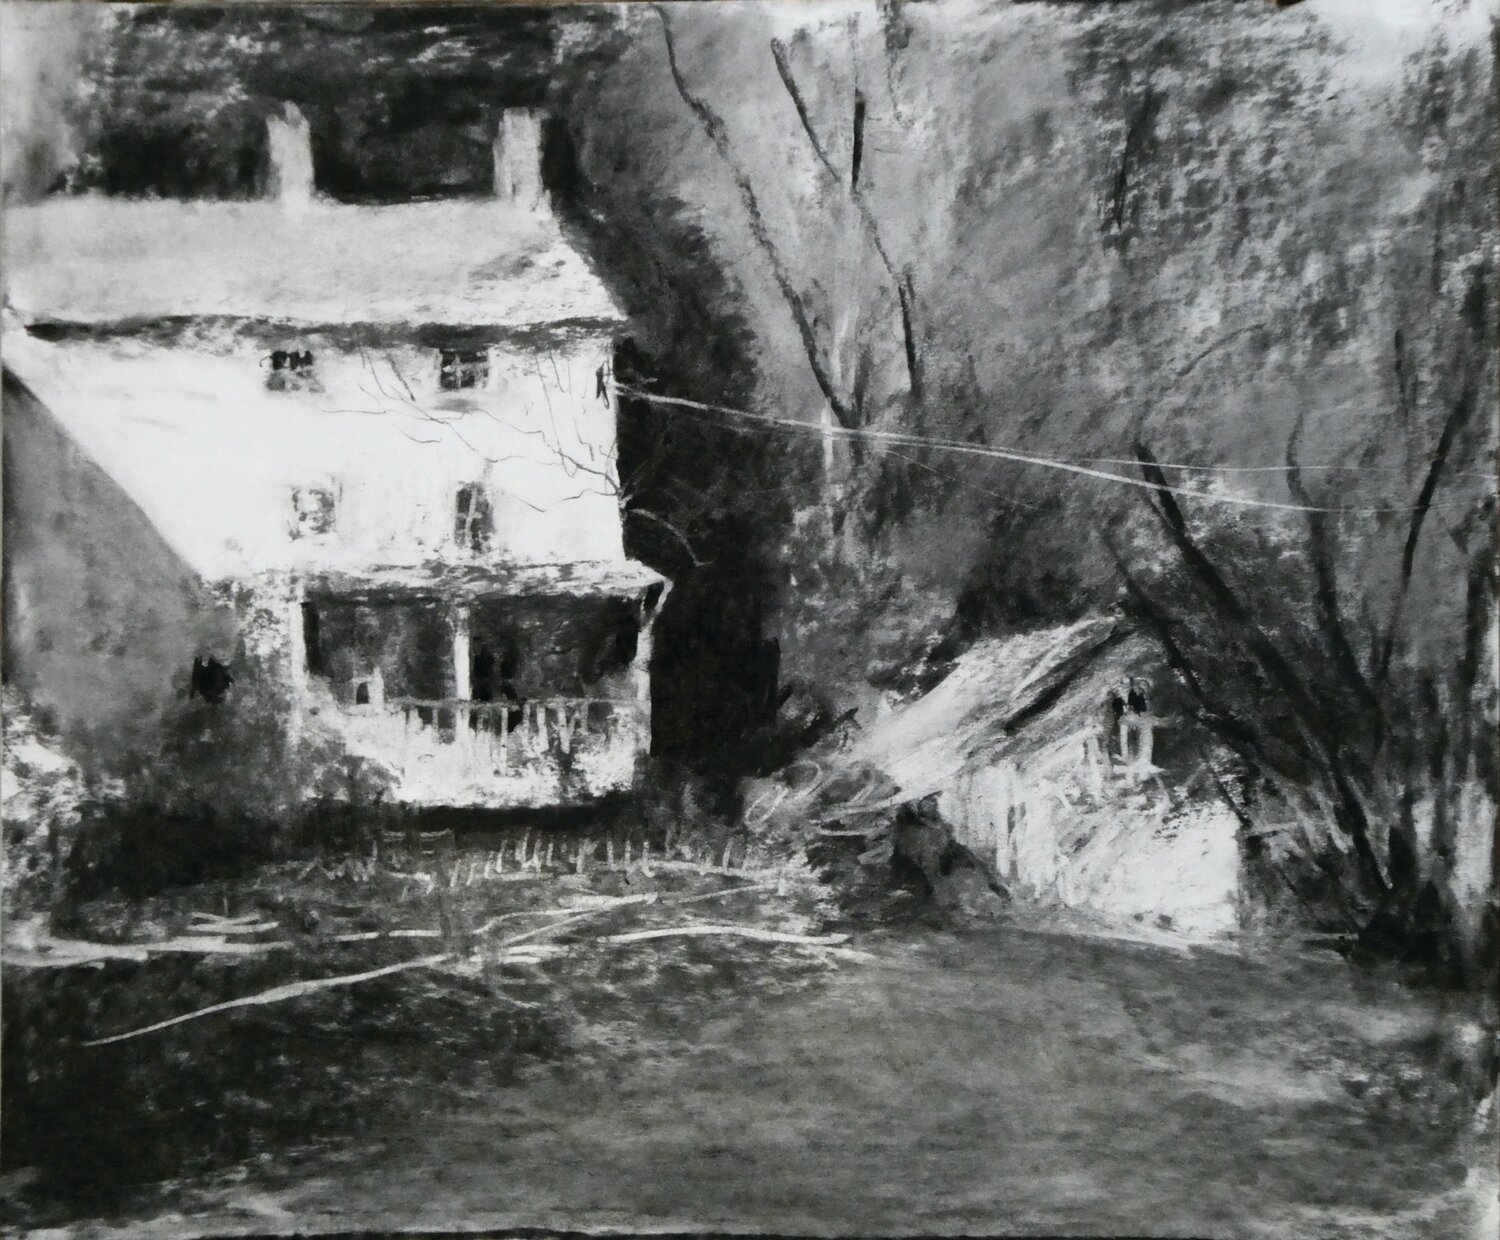 One of the charcoal drawings in David Stier’s exhibition in the English Village at Phillips’ Mill.